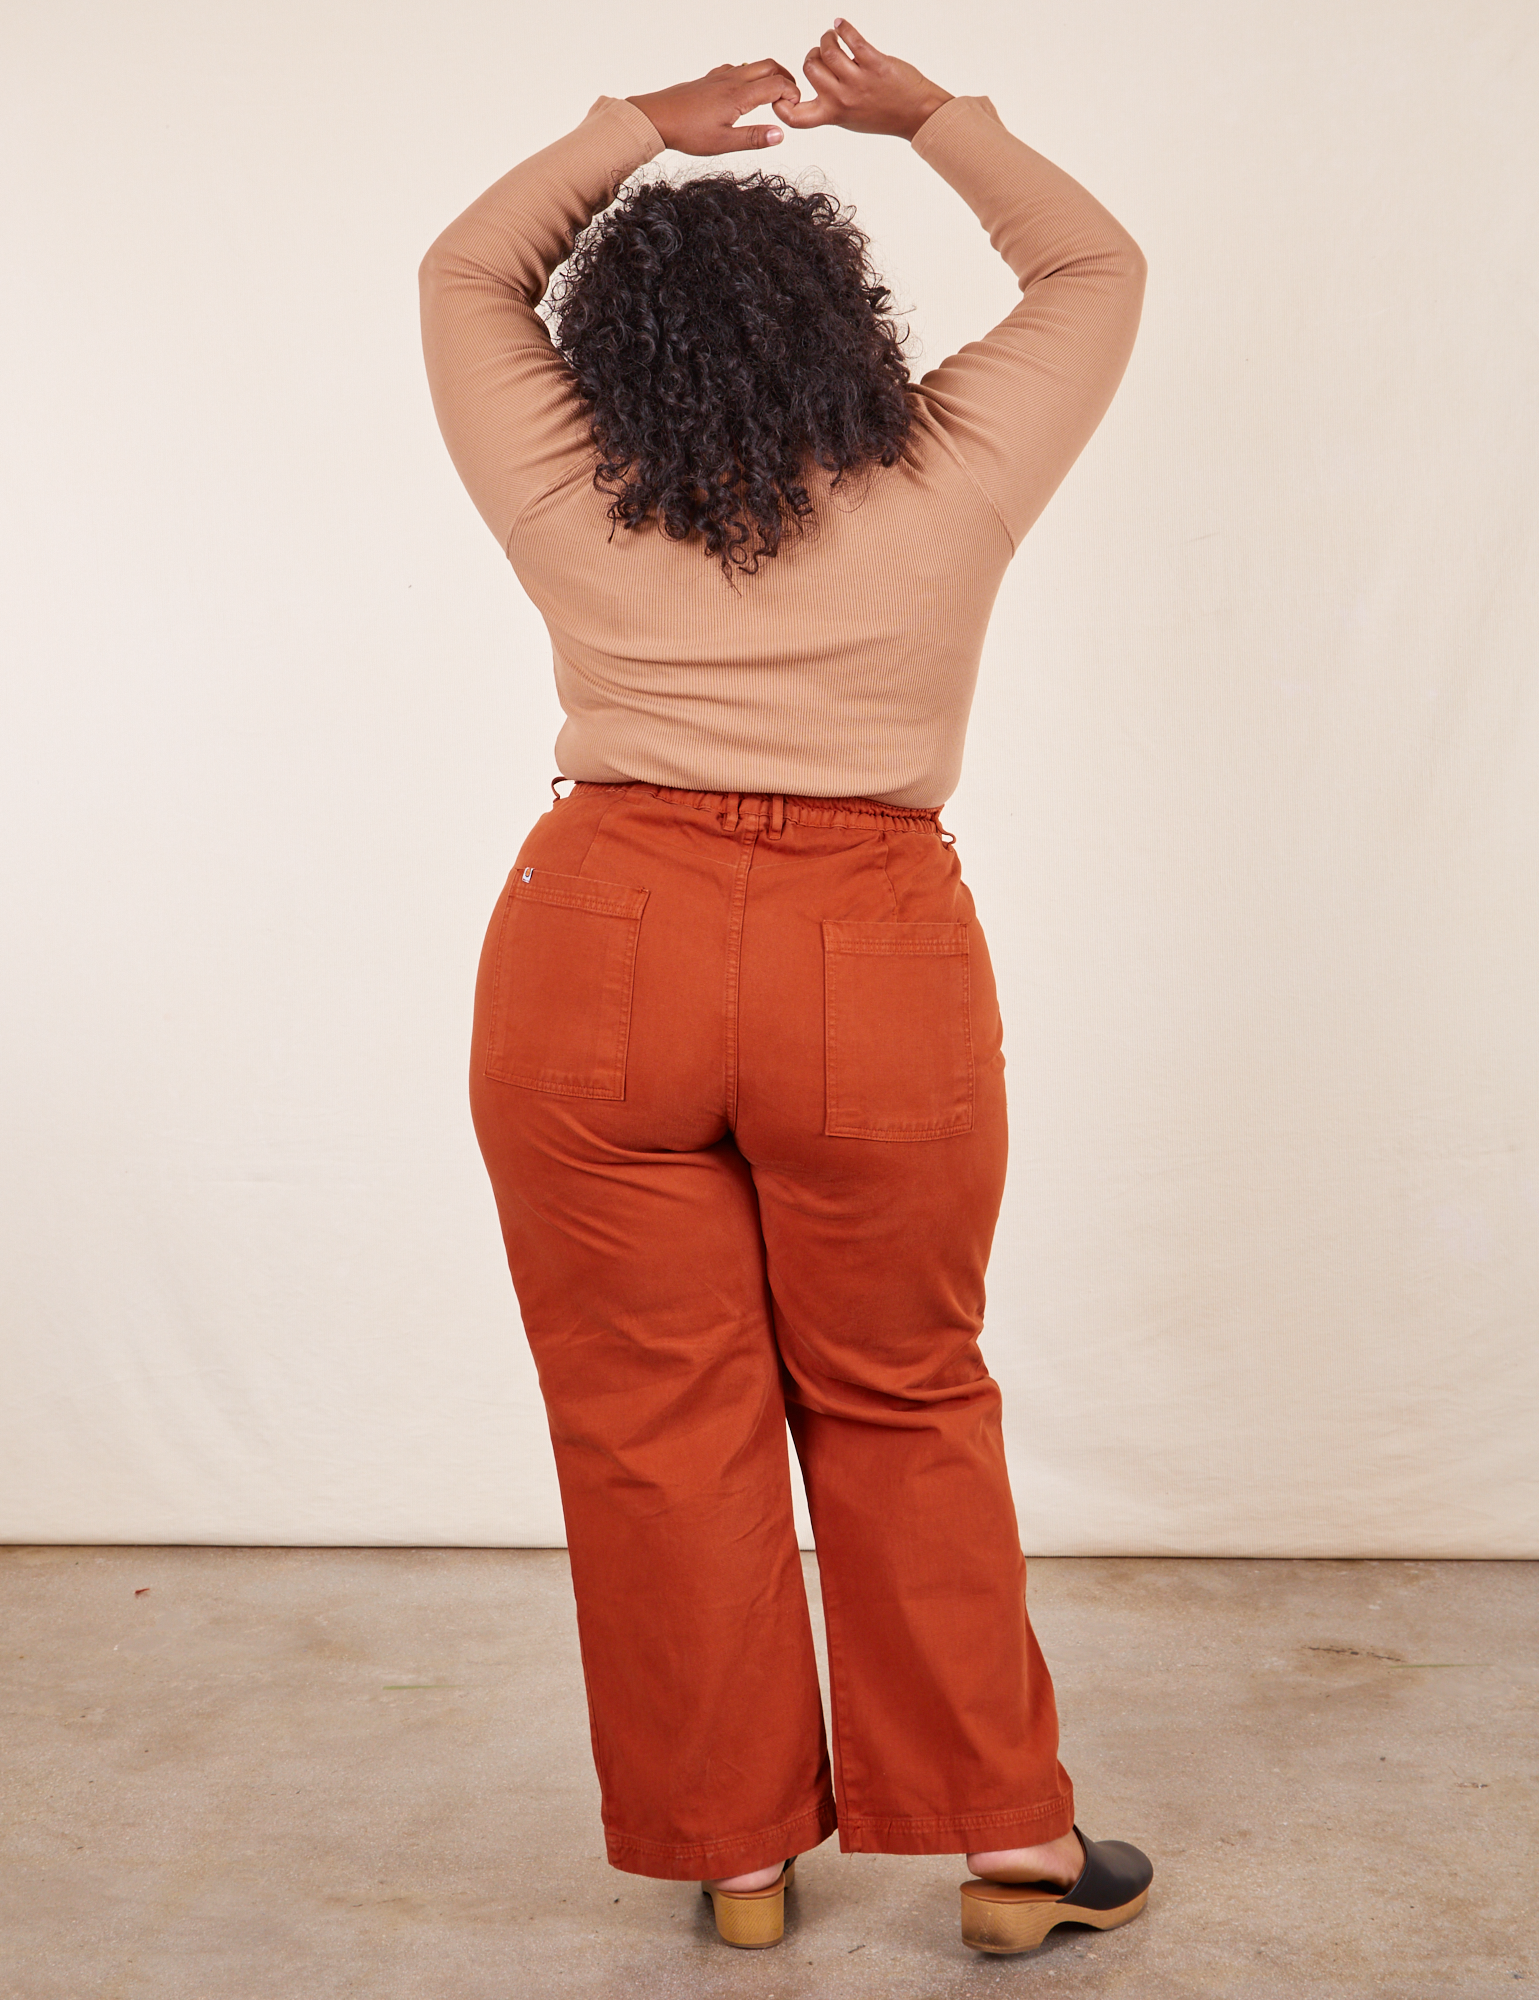 Back view of Western Pants in Burnt Terracotta and tan Essential Turtleneck on Morgan